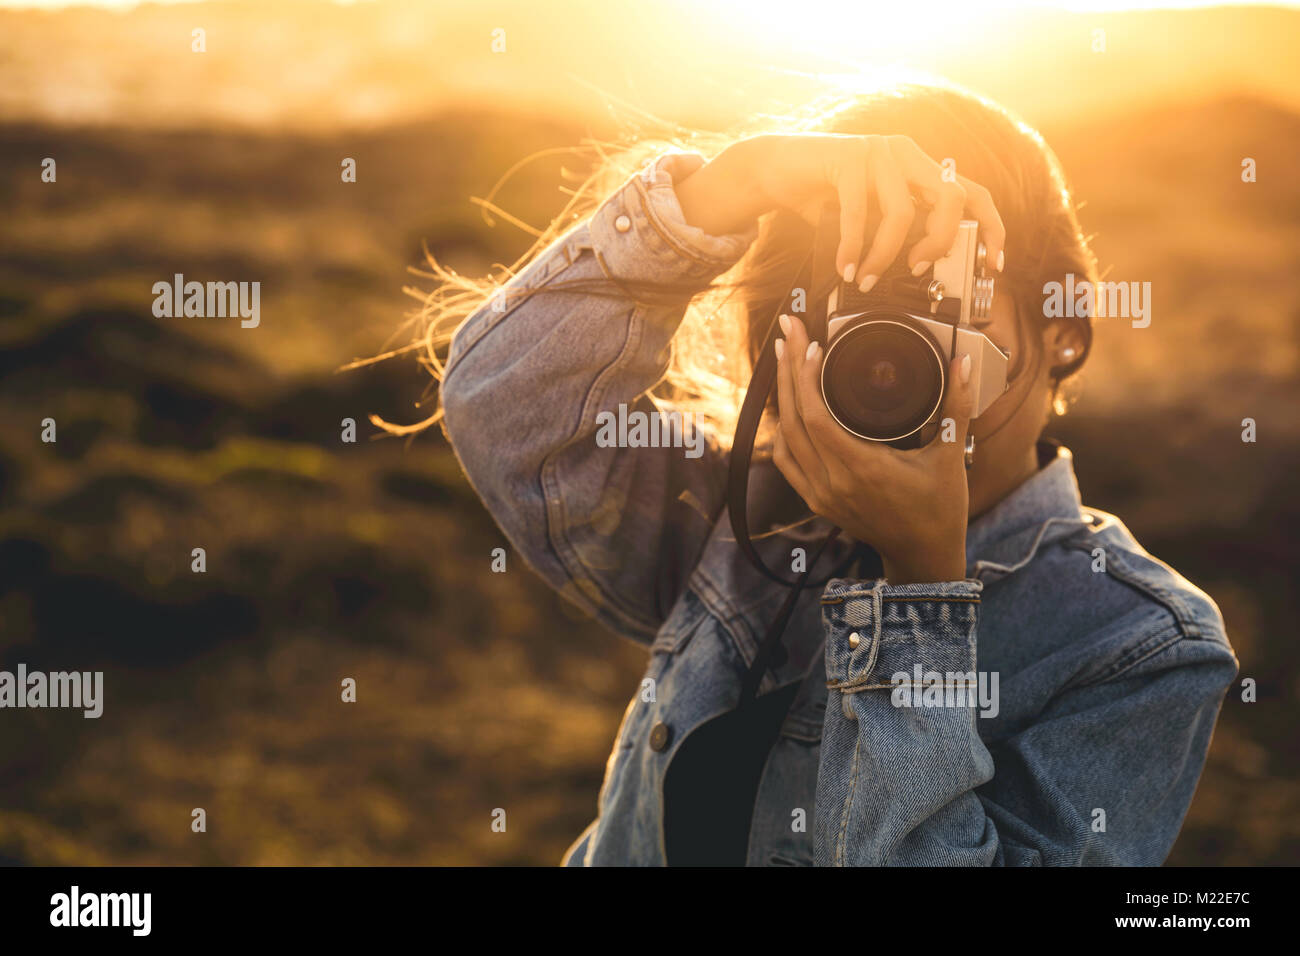 Beautiful woman taking picture outdoors with a analog camera Stock Photo